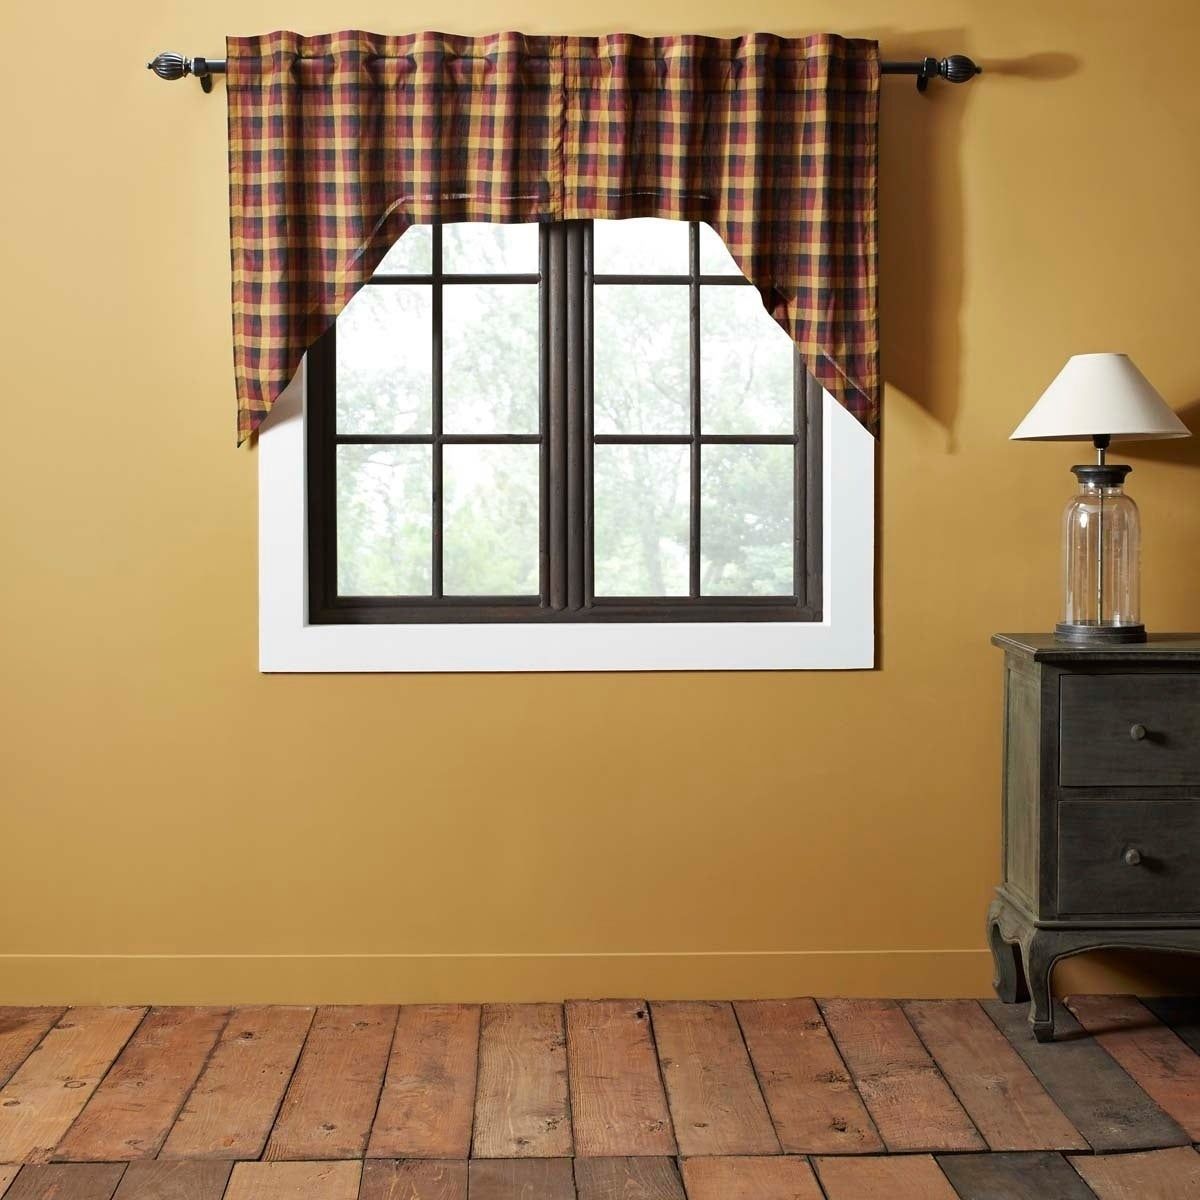 Buy Red Curtain Tiers Online At Overstock | Our Best Window In Flinders Forge 30 Inch Tiers In Garnet (View 19 of 20)